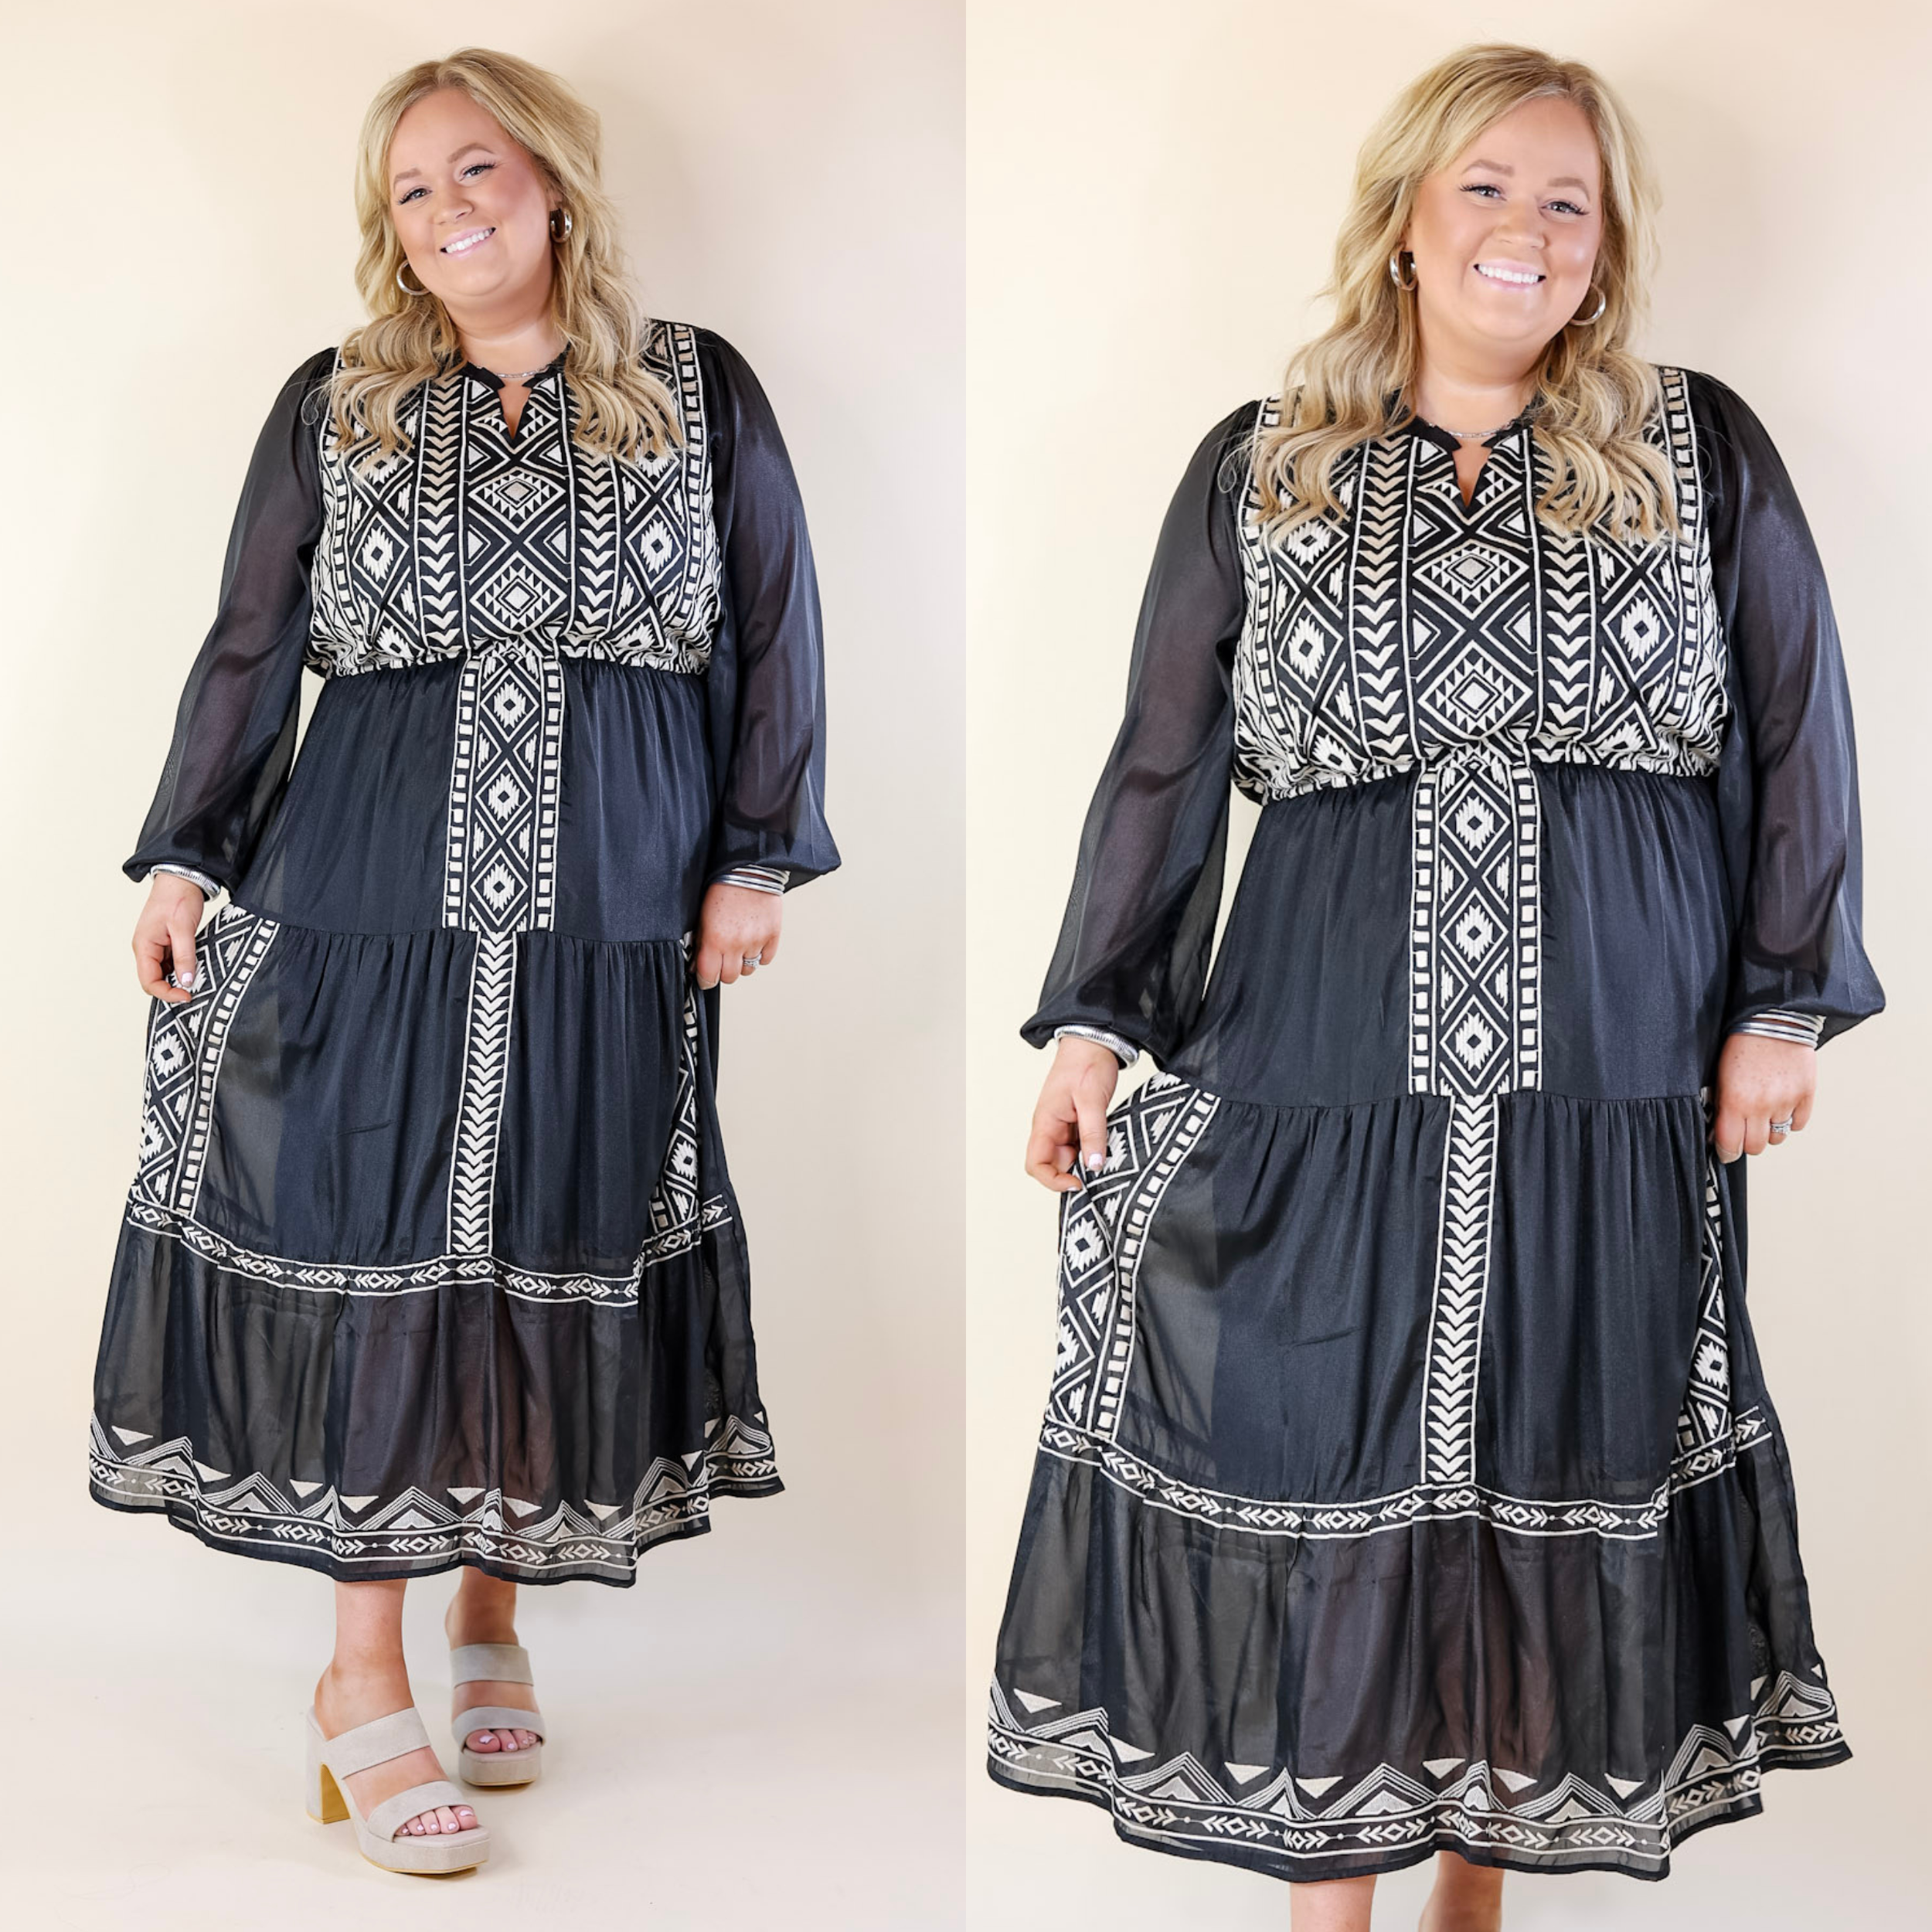 Bring The Drama Ivory Embroidered Maxi Dress with Long Sleeves in Black - Giddy Up Glamour Boutique